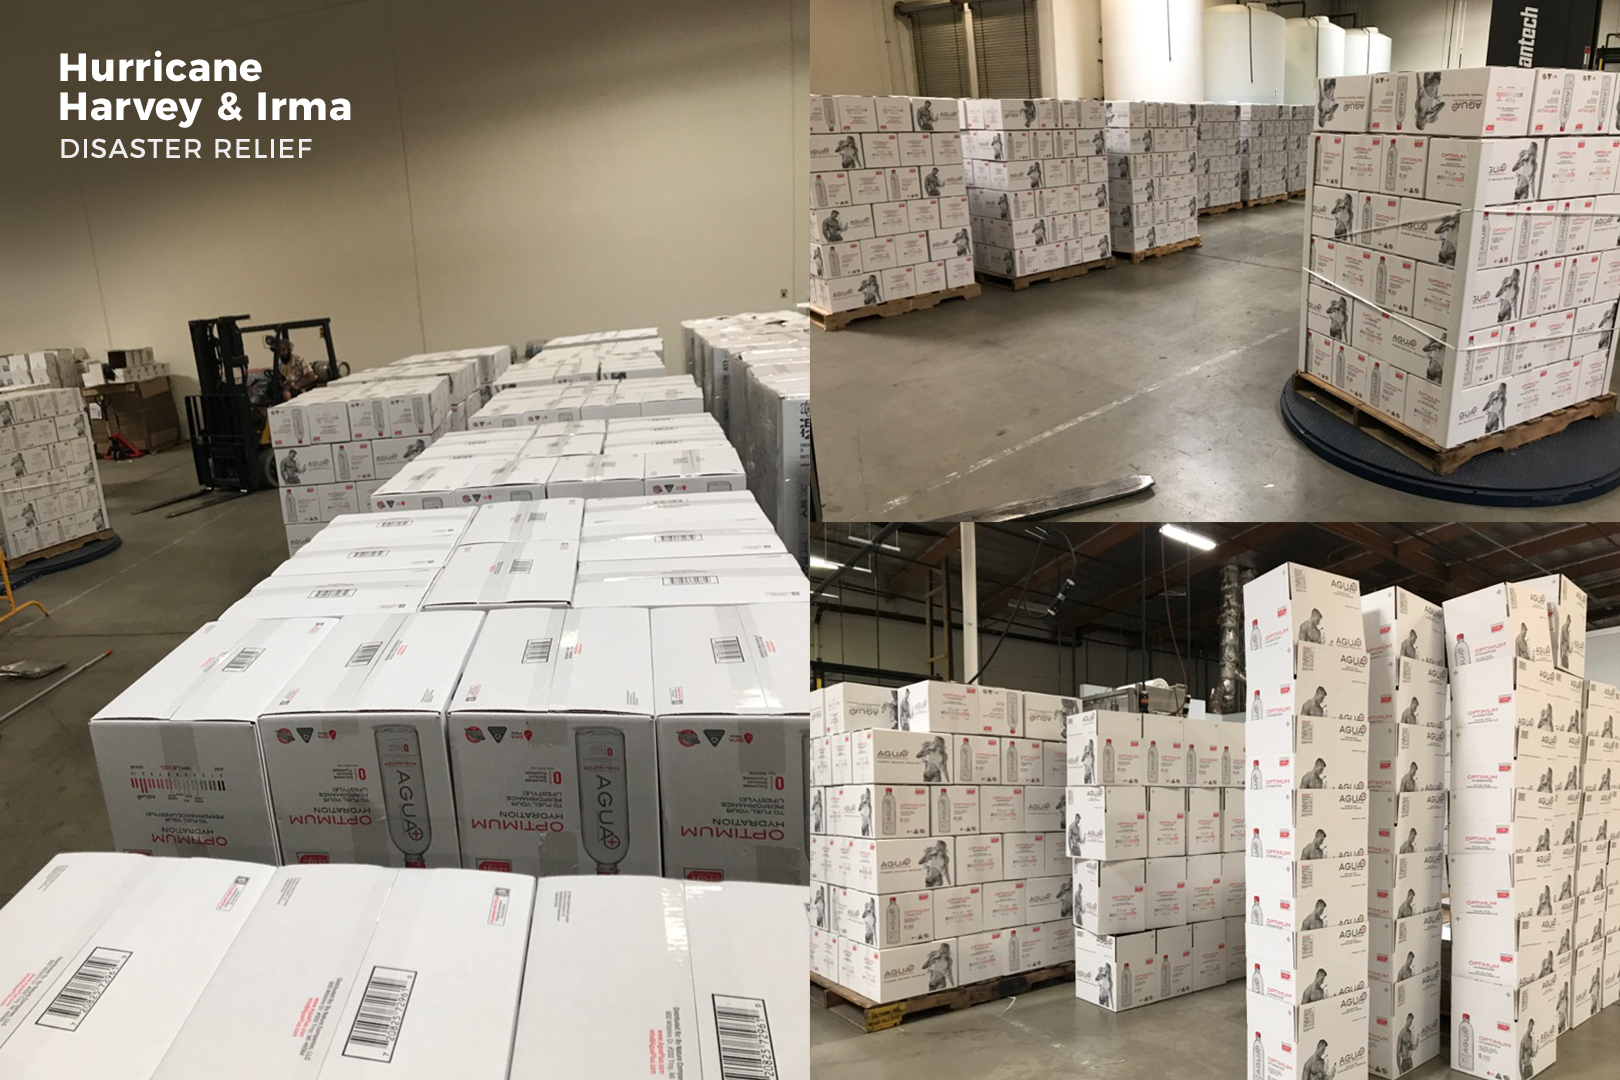 Agua Plus donted to Hurricane Harvey and Irma relief Efforts